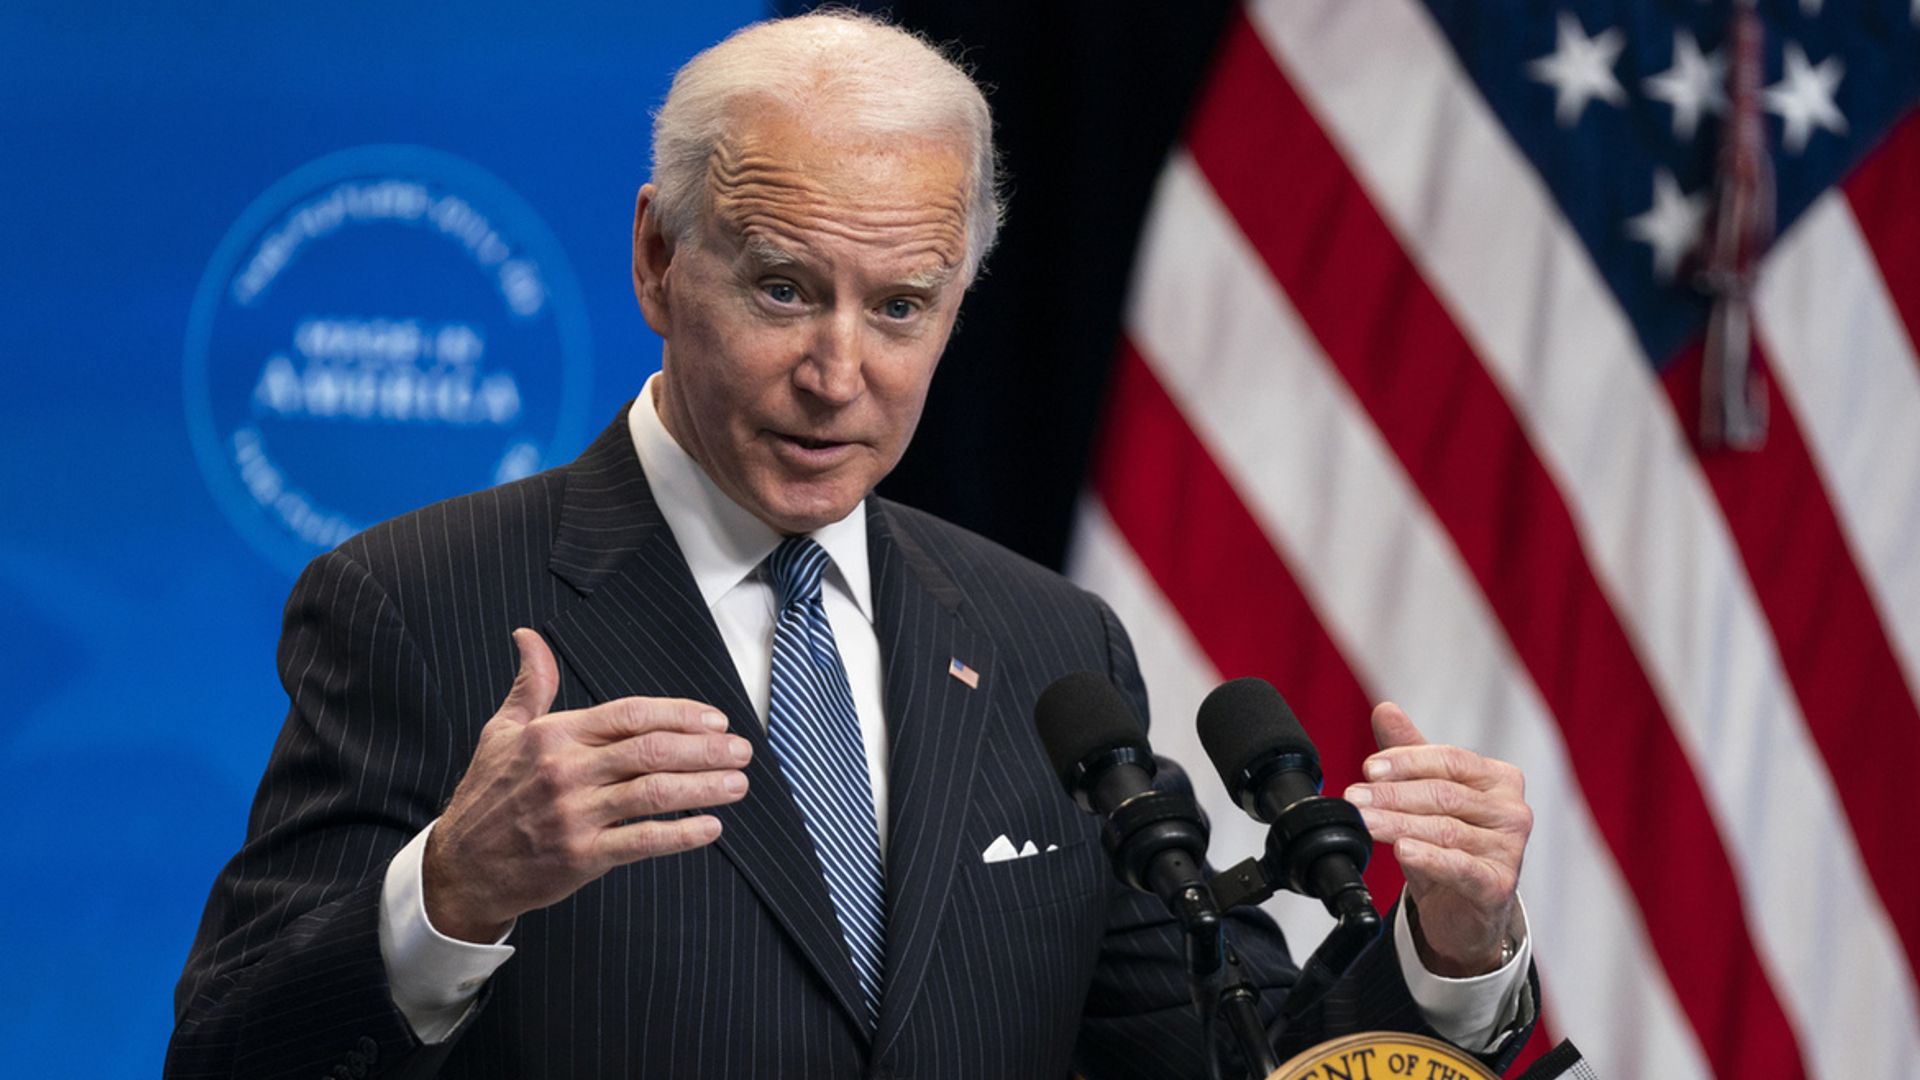 Joe Biden warned Putin about the issues of his “act of self-defense”